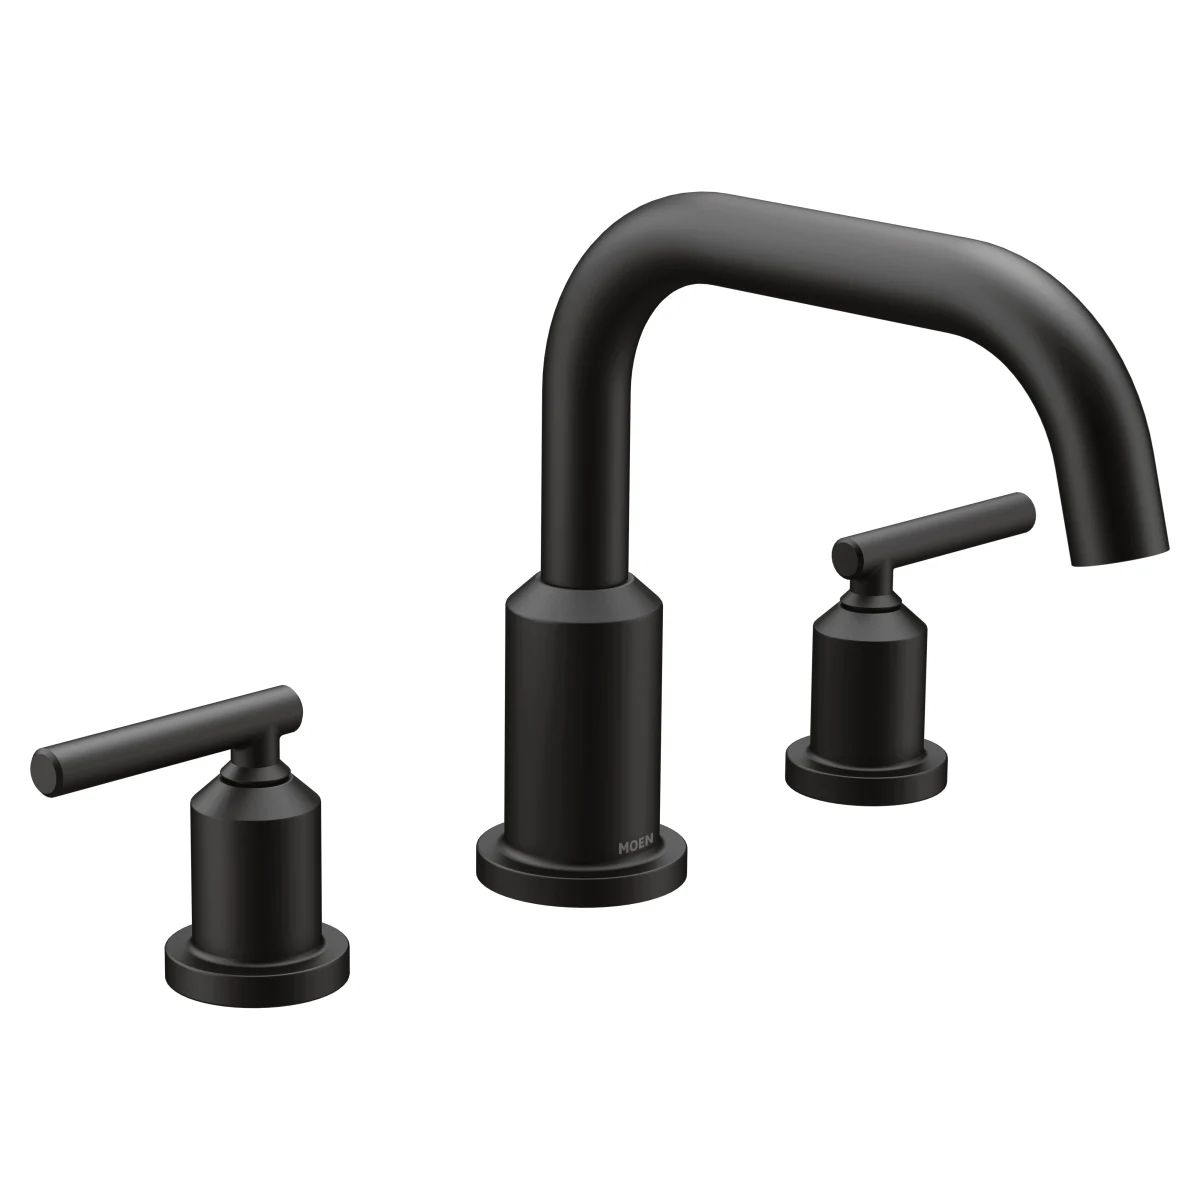 Gibson Widespread Deck Mounted Roman Tub Filler Trim with Two Handles - Less Rough In Valve | Build.com, Inc.